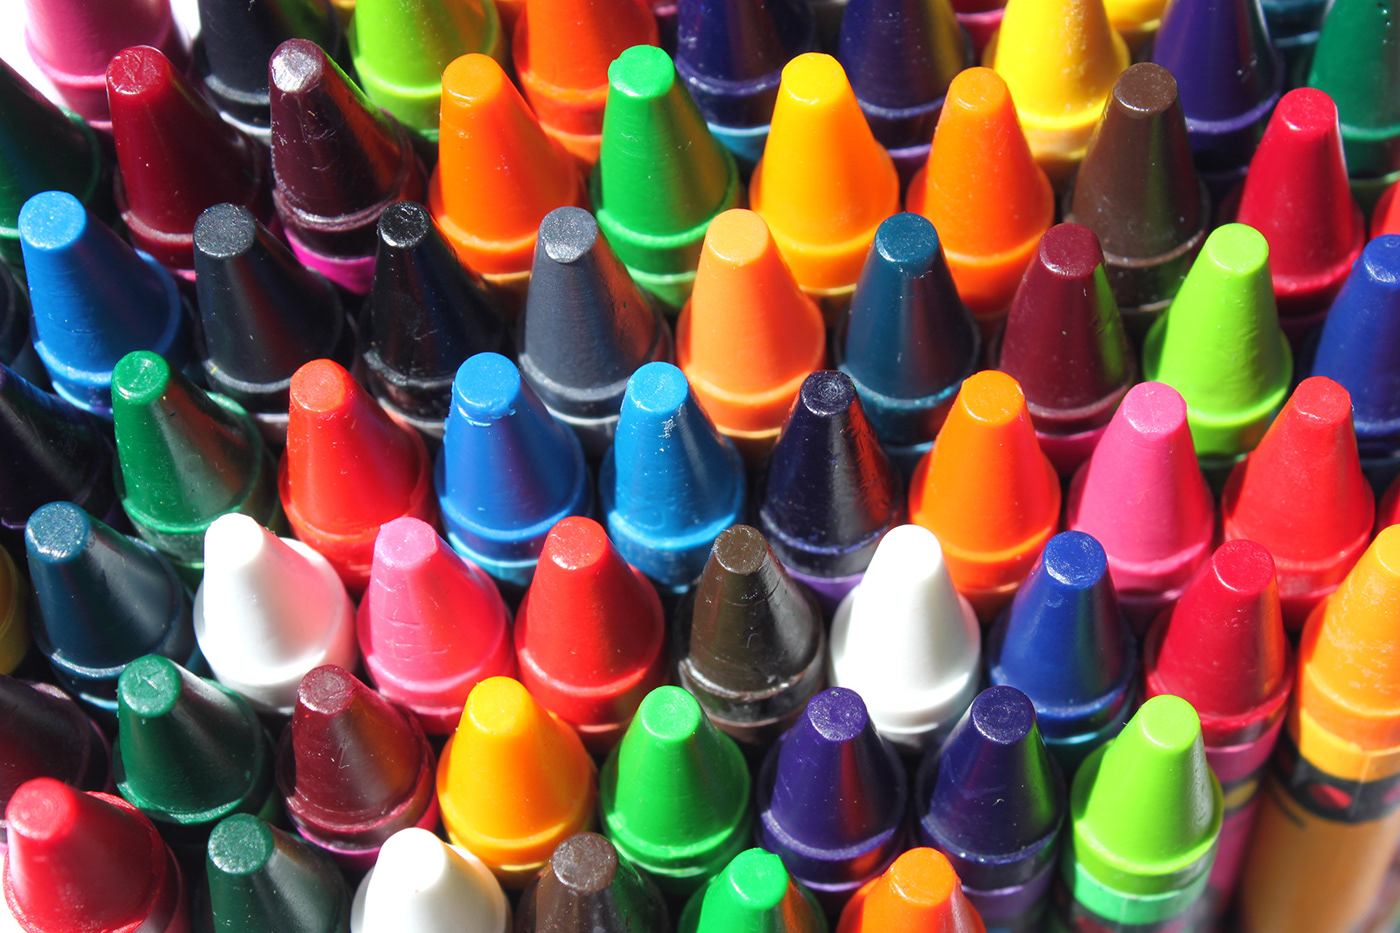 Crayons in many colors